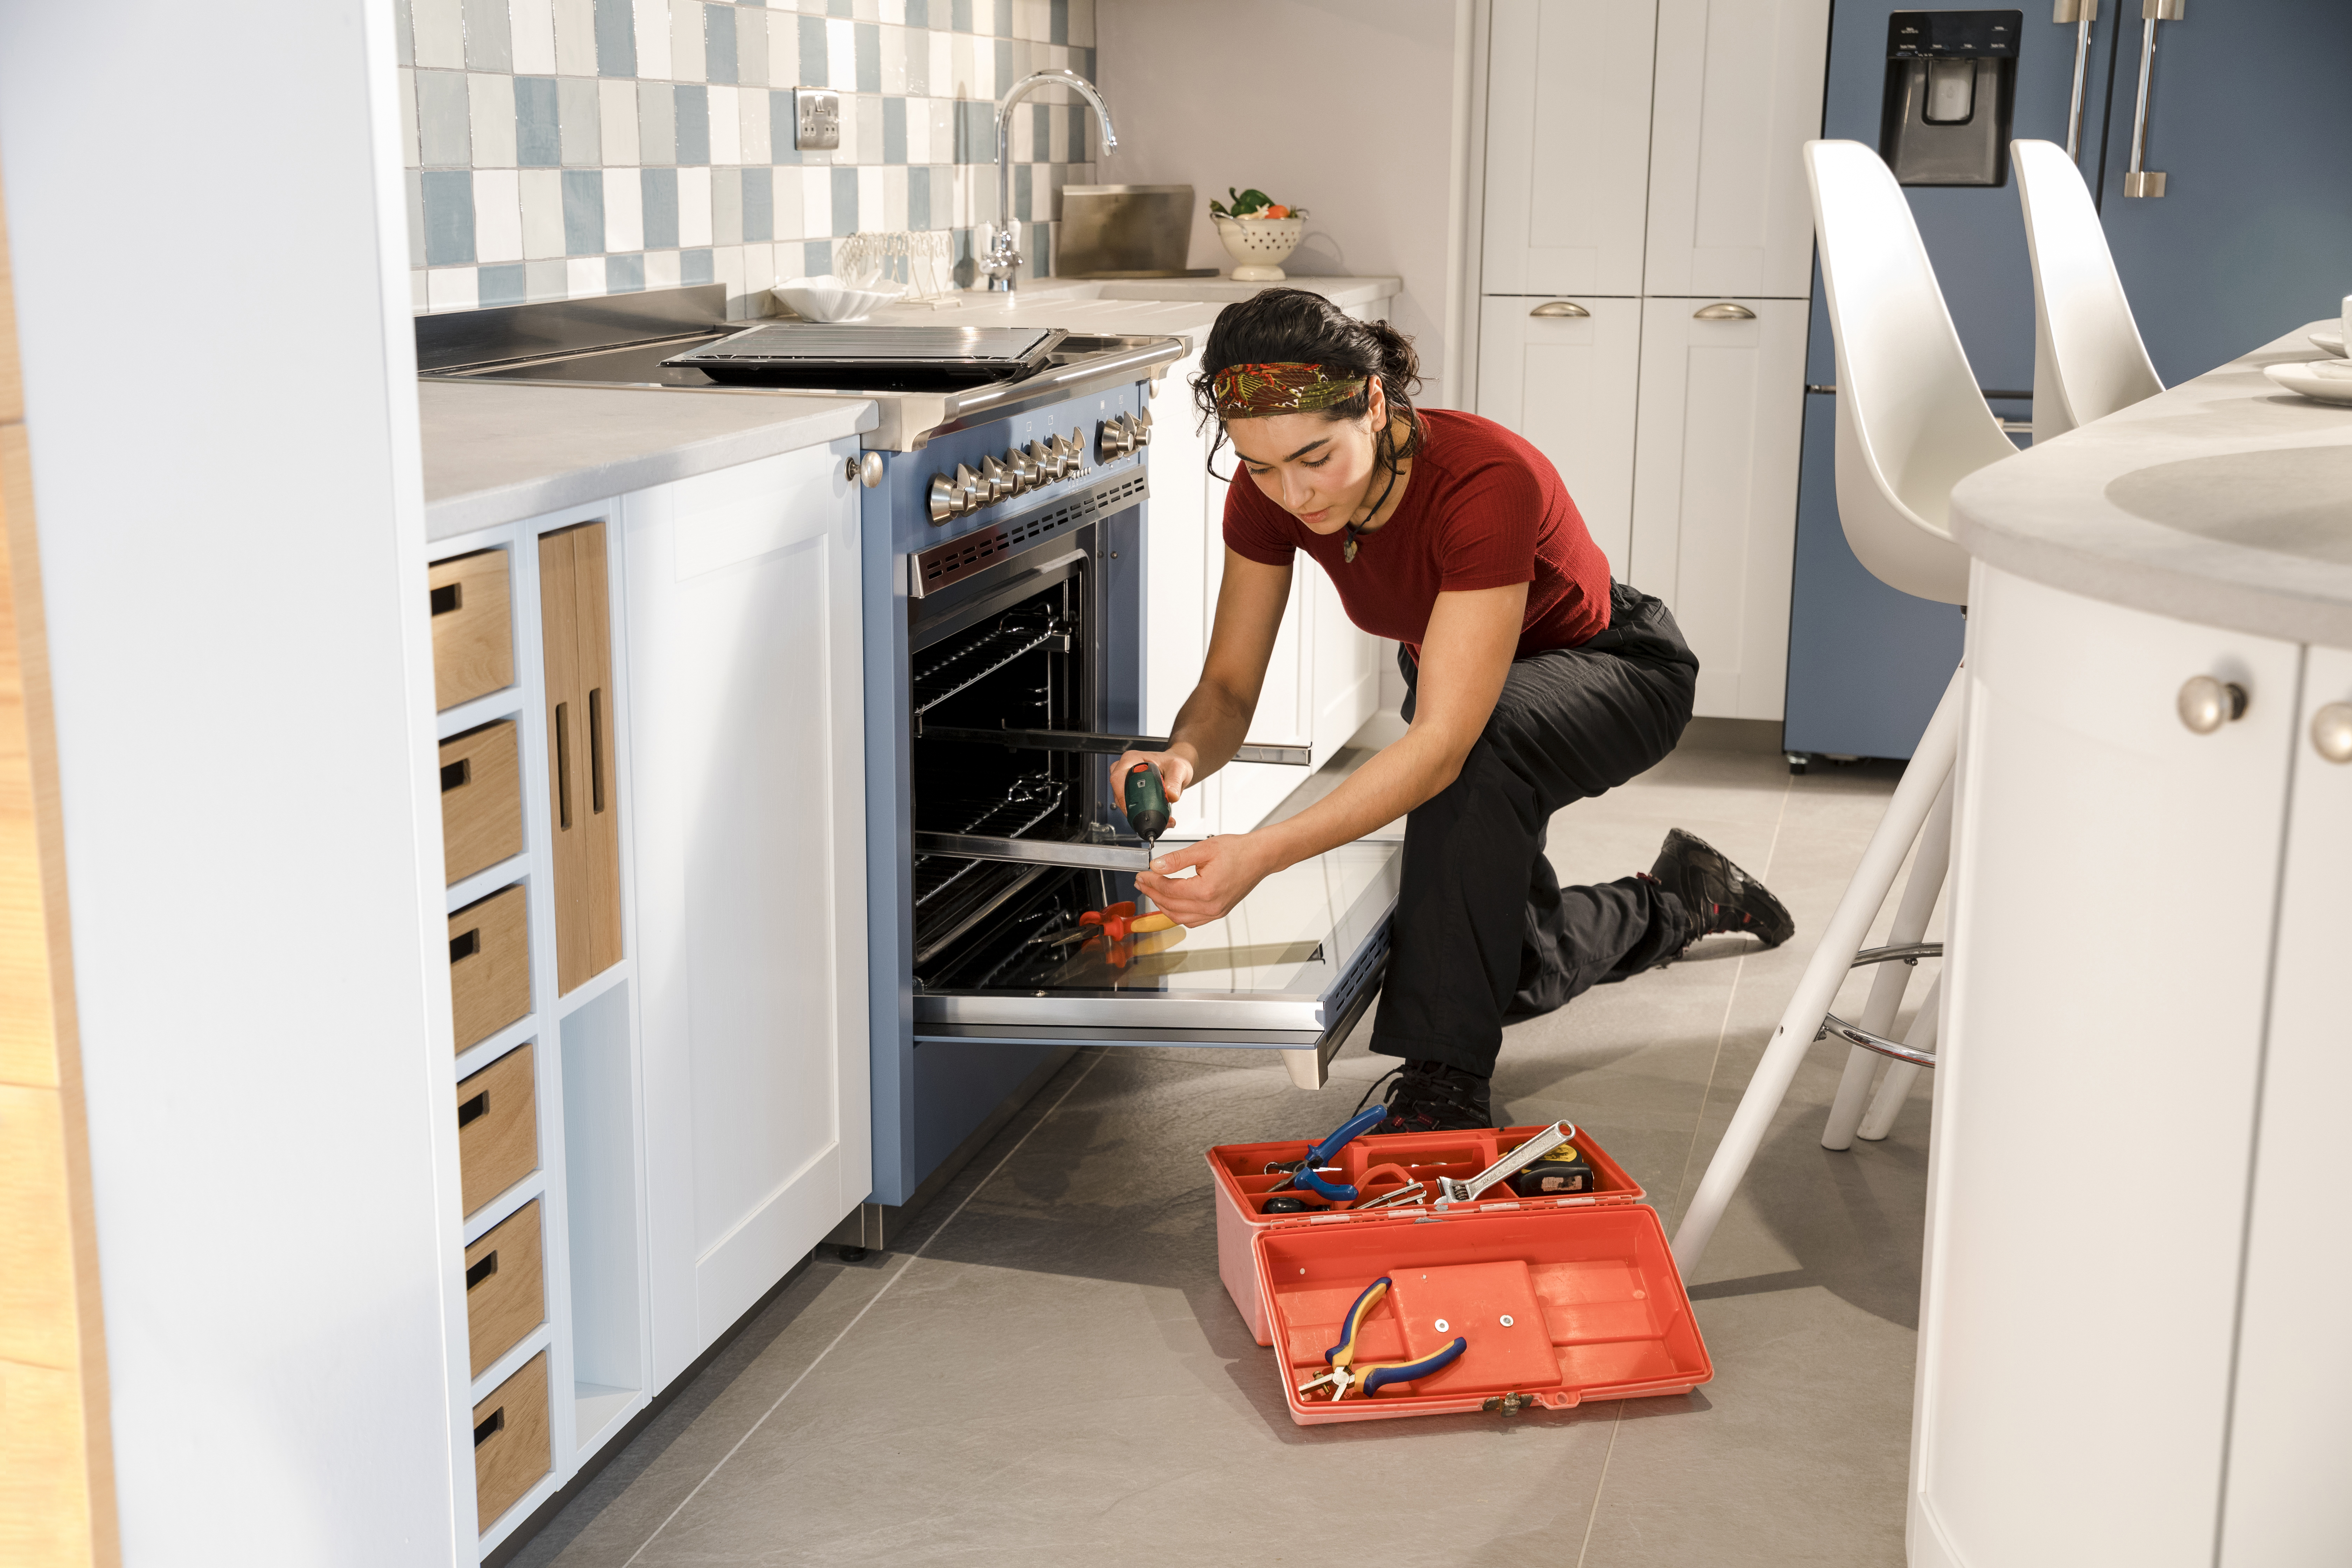 Have problems Baking with Gas Oven? Here is How to Fix 